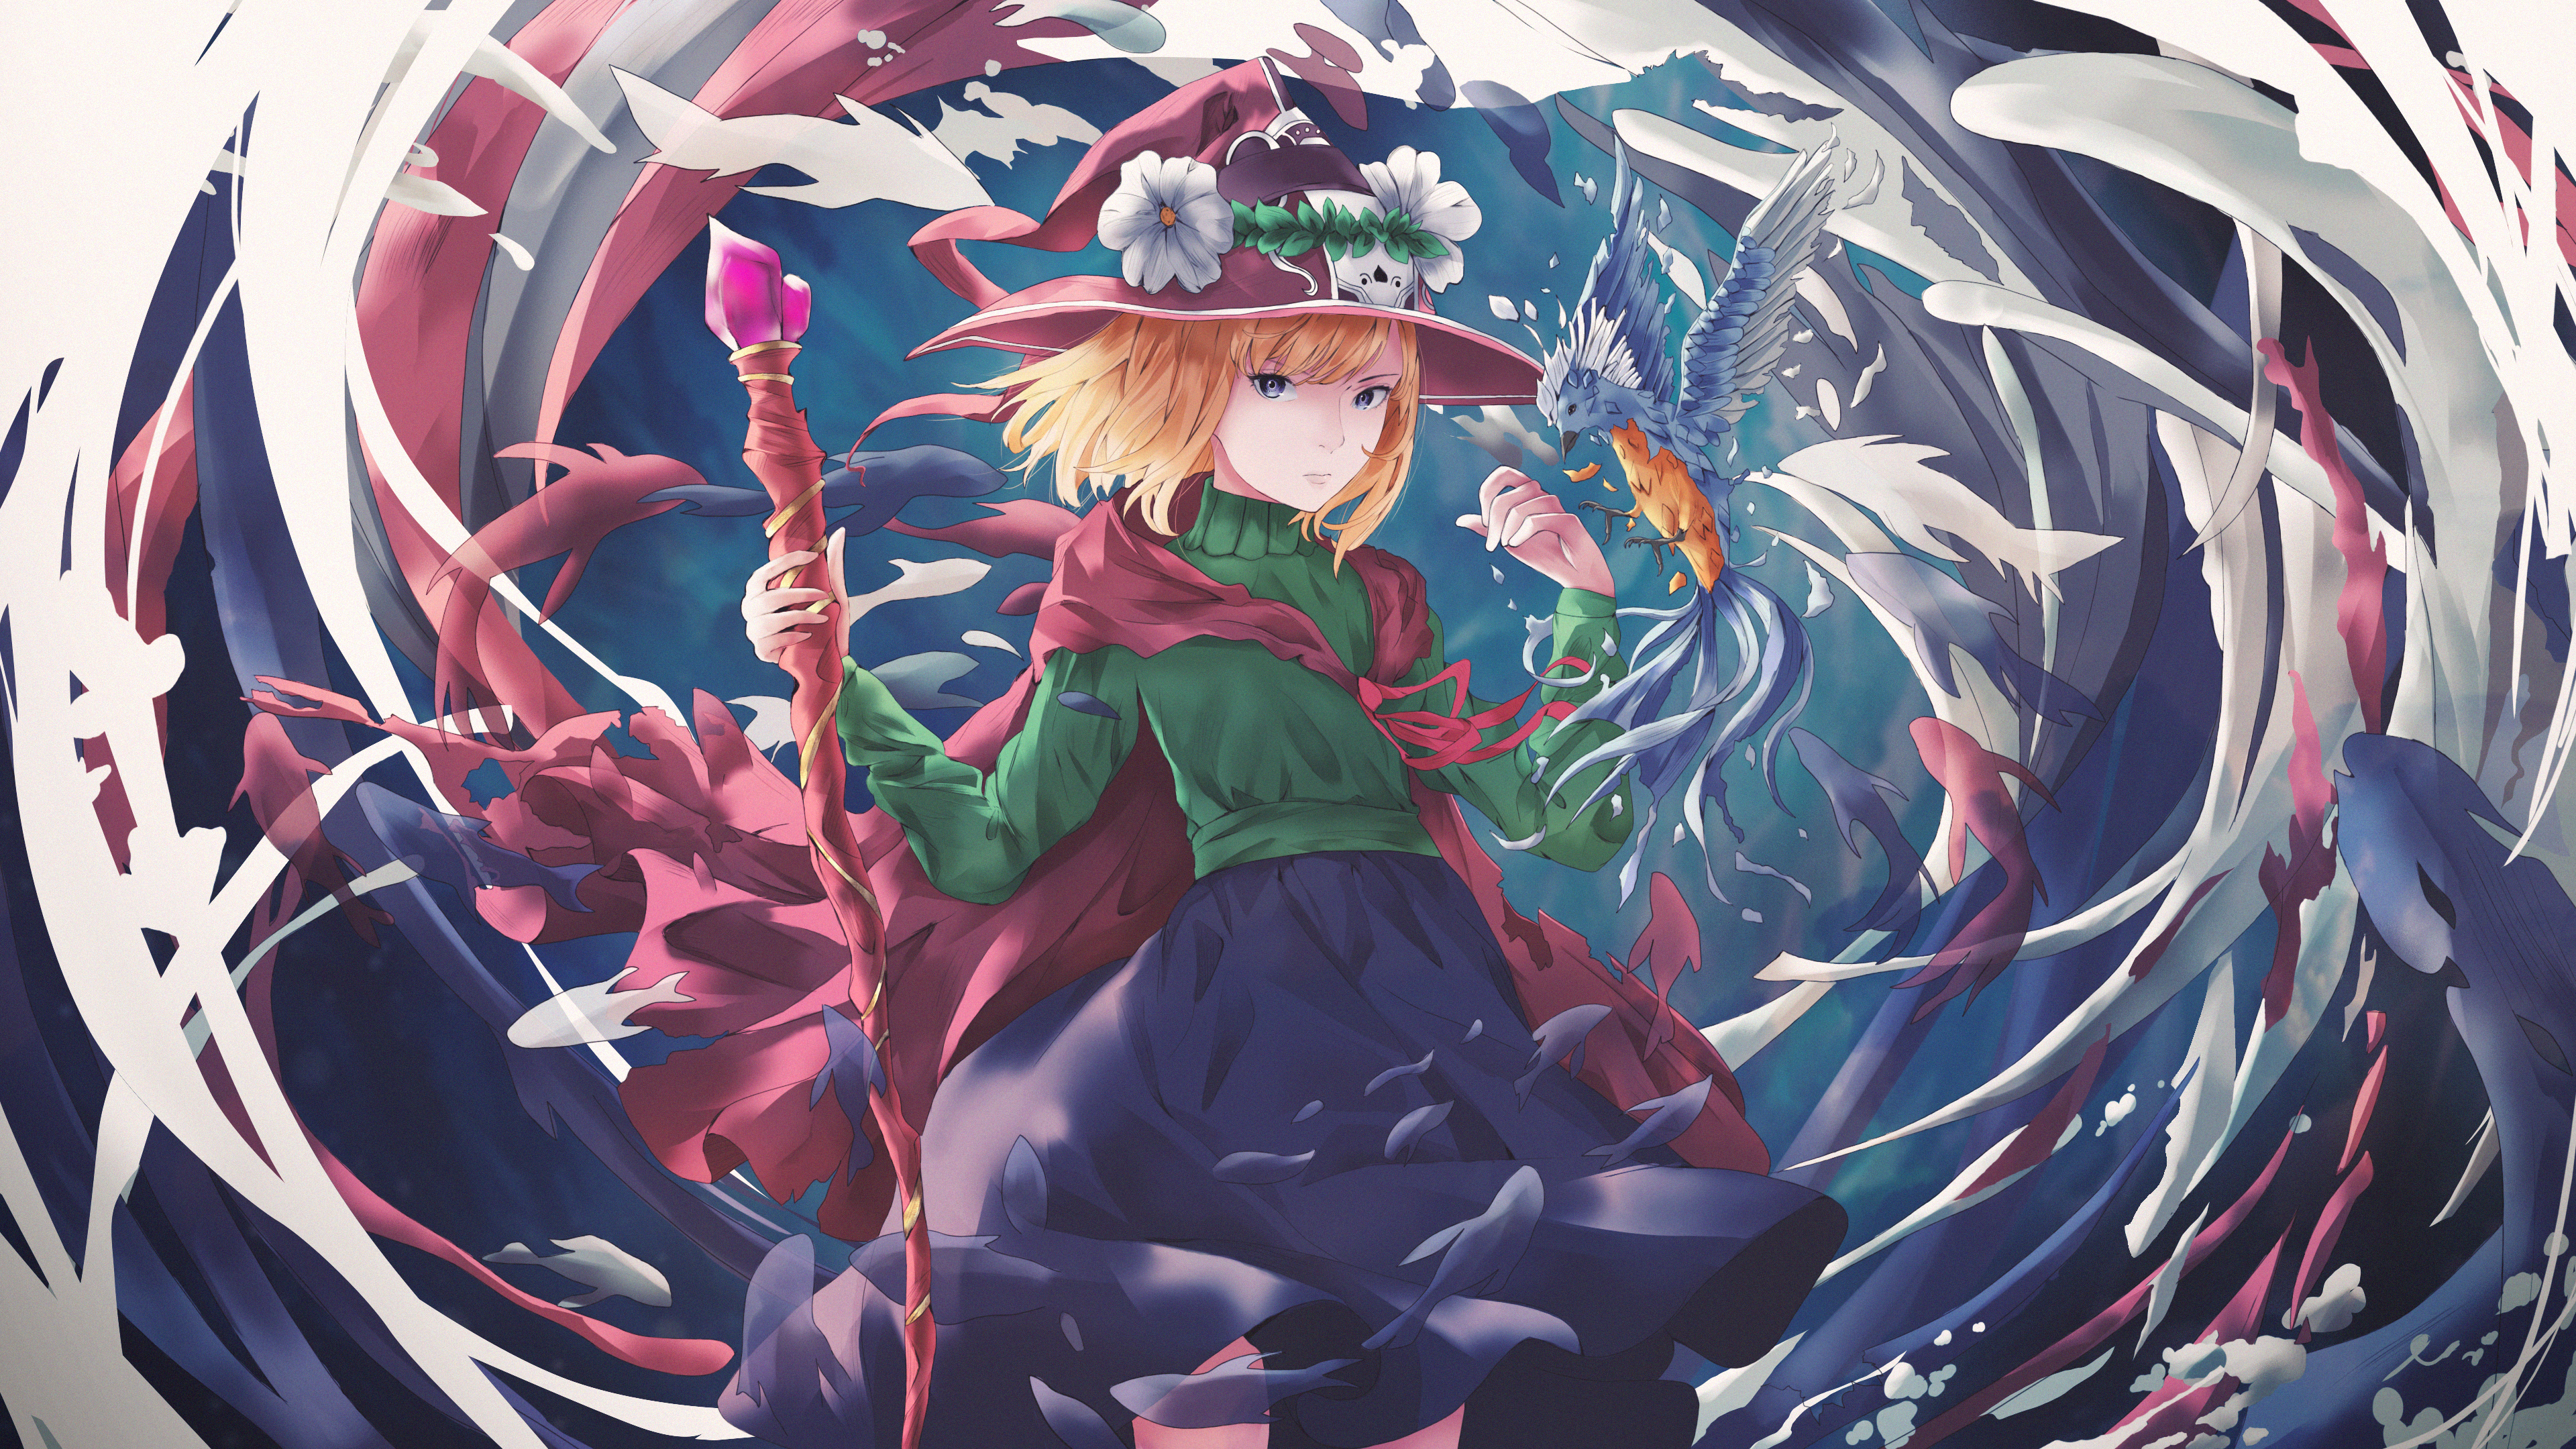 Anime 3840x2160 anime anime girls original characters blonde witch hat fantasy girl